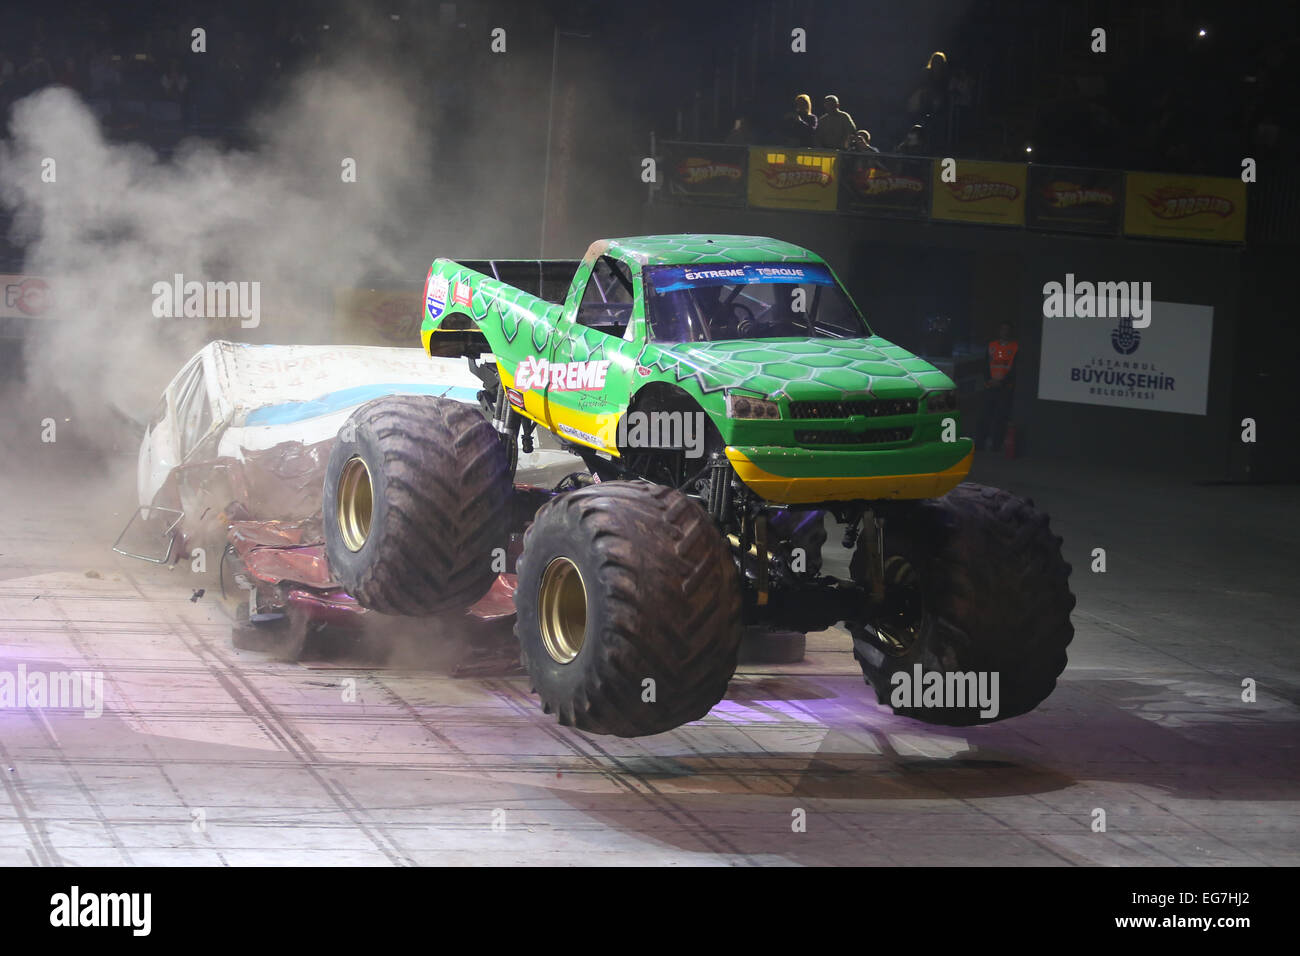 ISTANBUL, TURKEY - FEBRUARY 01, 2015: Monster Truck Extreme Revisited crush to old cars in Sinan Erdem Dome during Monster Hot W Stock Photo